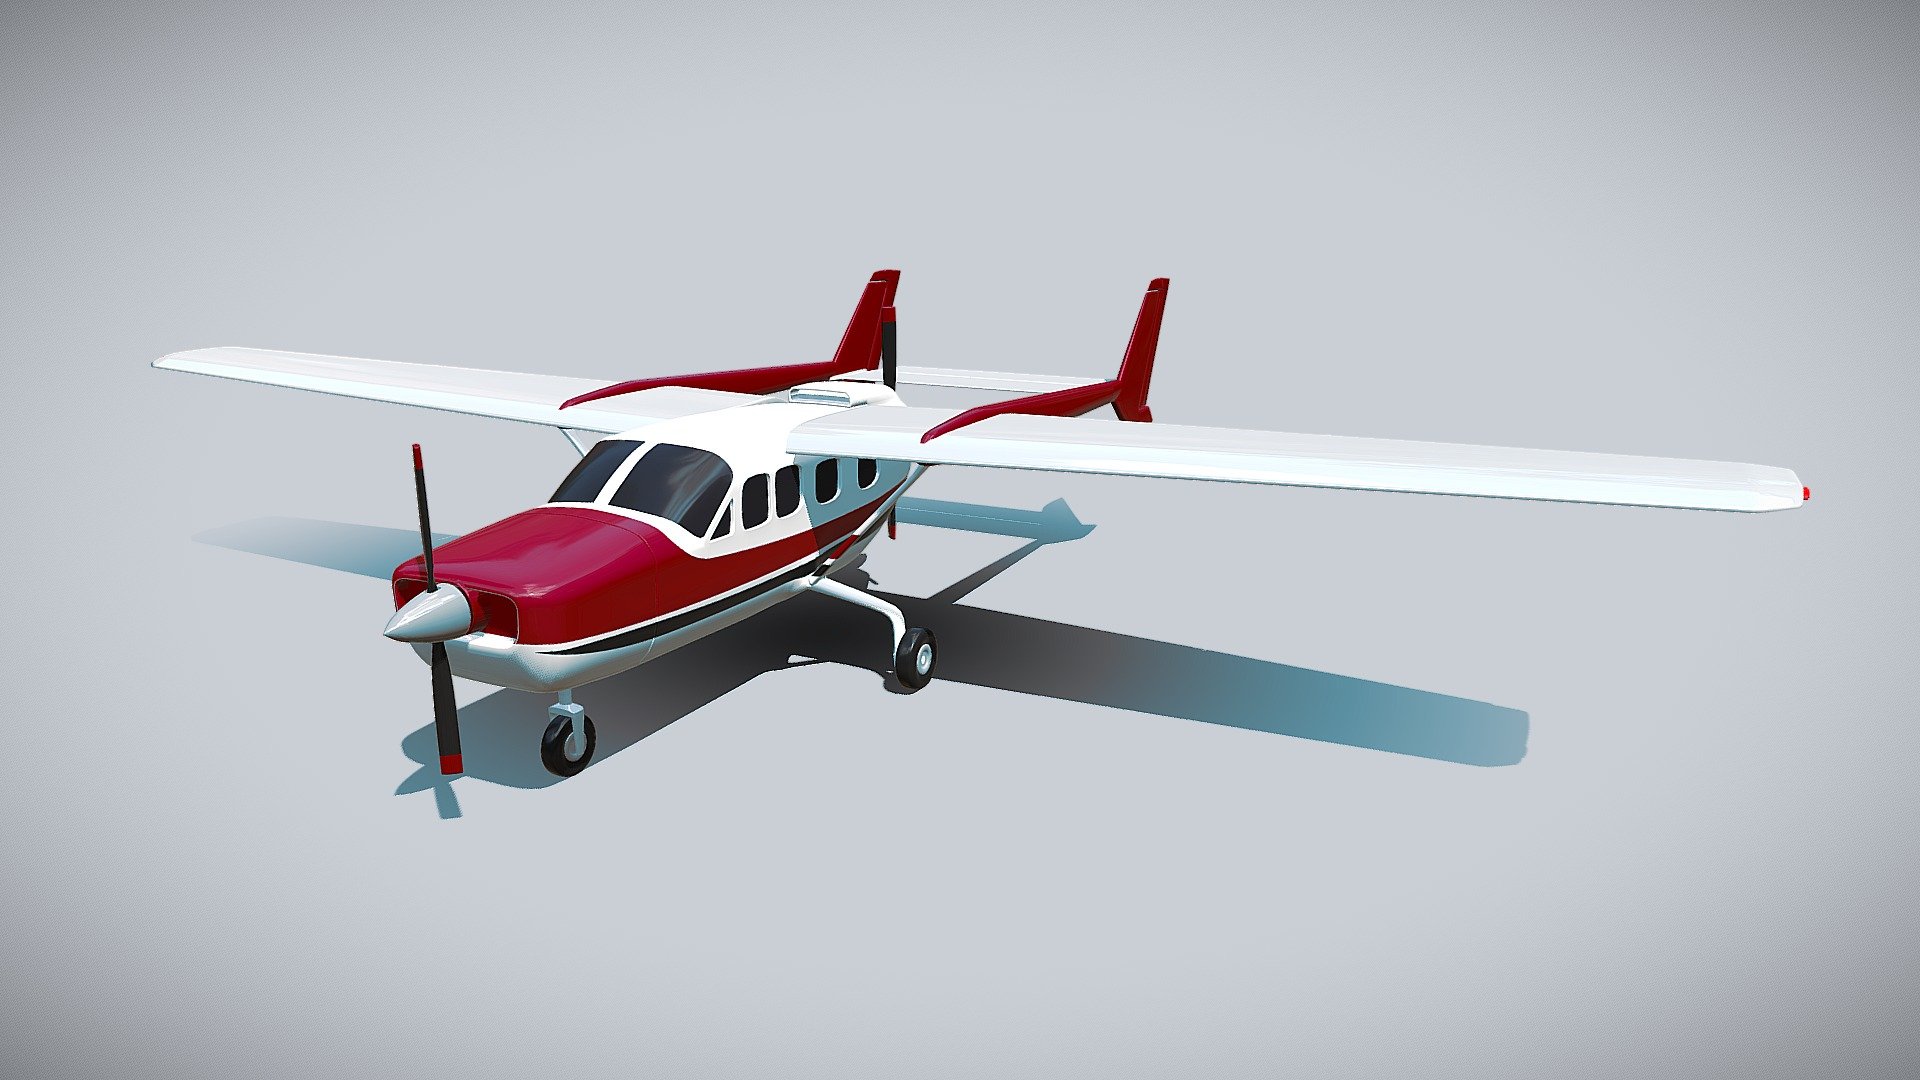 3D Model created with blender3d 2.70 modeling software.Object detached,named by objects and materials.There are no interior objects for this product.There is only one texture for fuselage red decal.You can rotate wing elevators,but I didn't rigged it.Model was rendered with subdivision 2,until my model was exported with subdivision 1.I've used hdr image for my background,not included with final product.Enjoy my product.

3ds file 
verts: 186752 
polys: 62264

obj file 
verts: 32855 
polys: 62264

Checked with GLC playe - Cessna Skymaster 337 airplane - 3D model by koleos3d 3d model